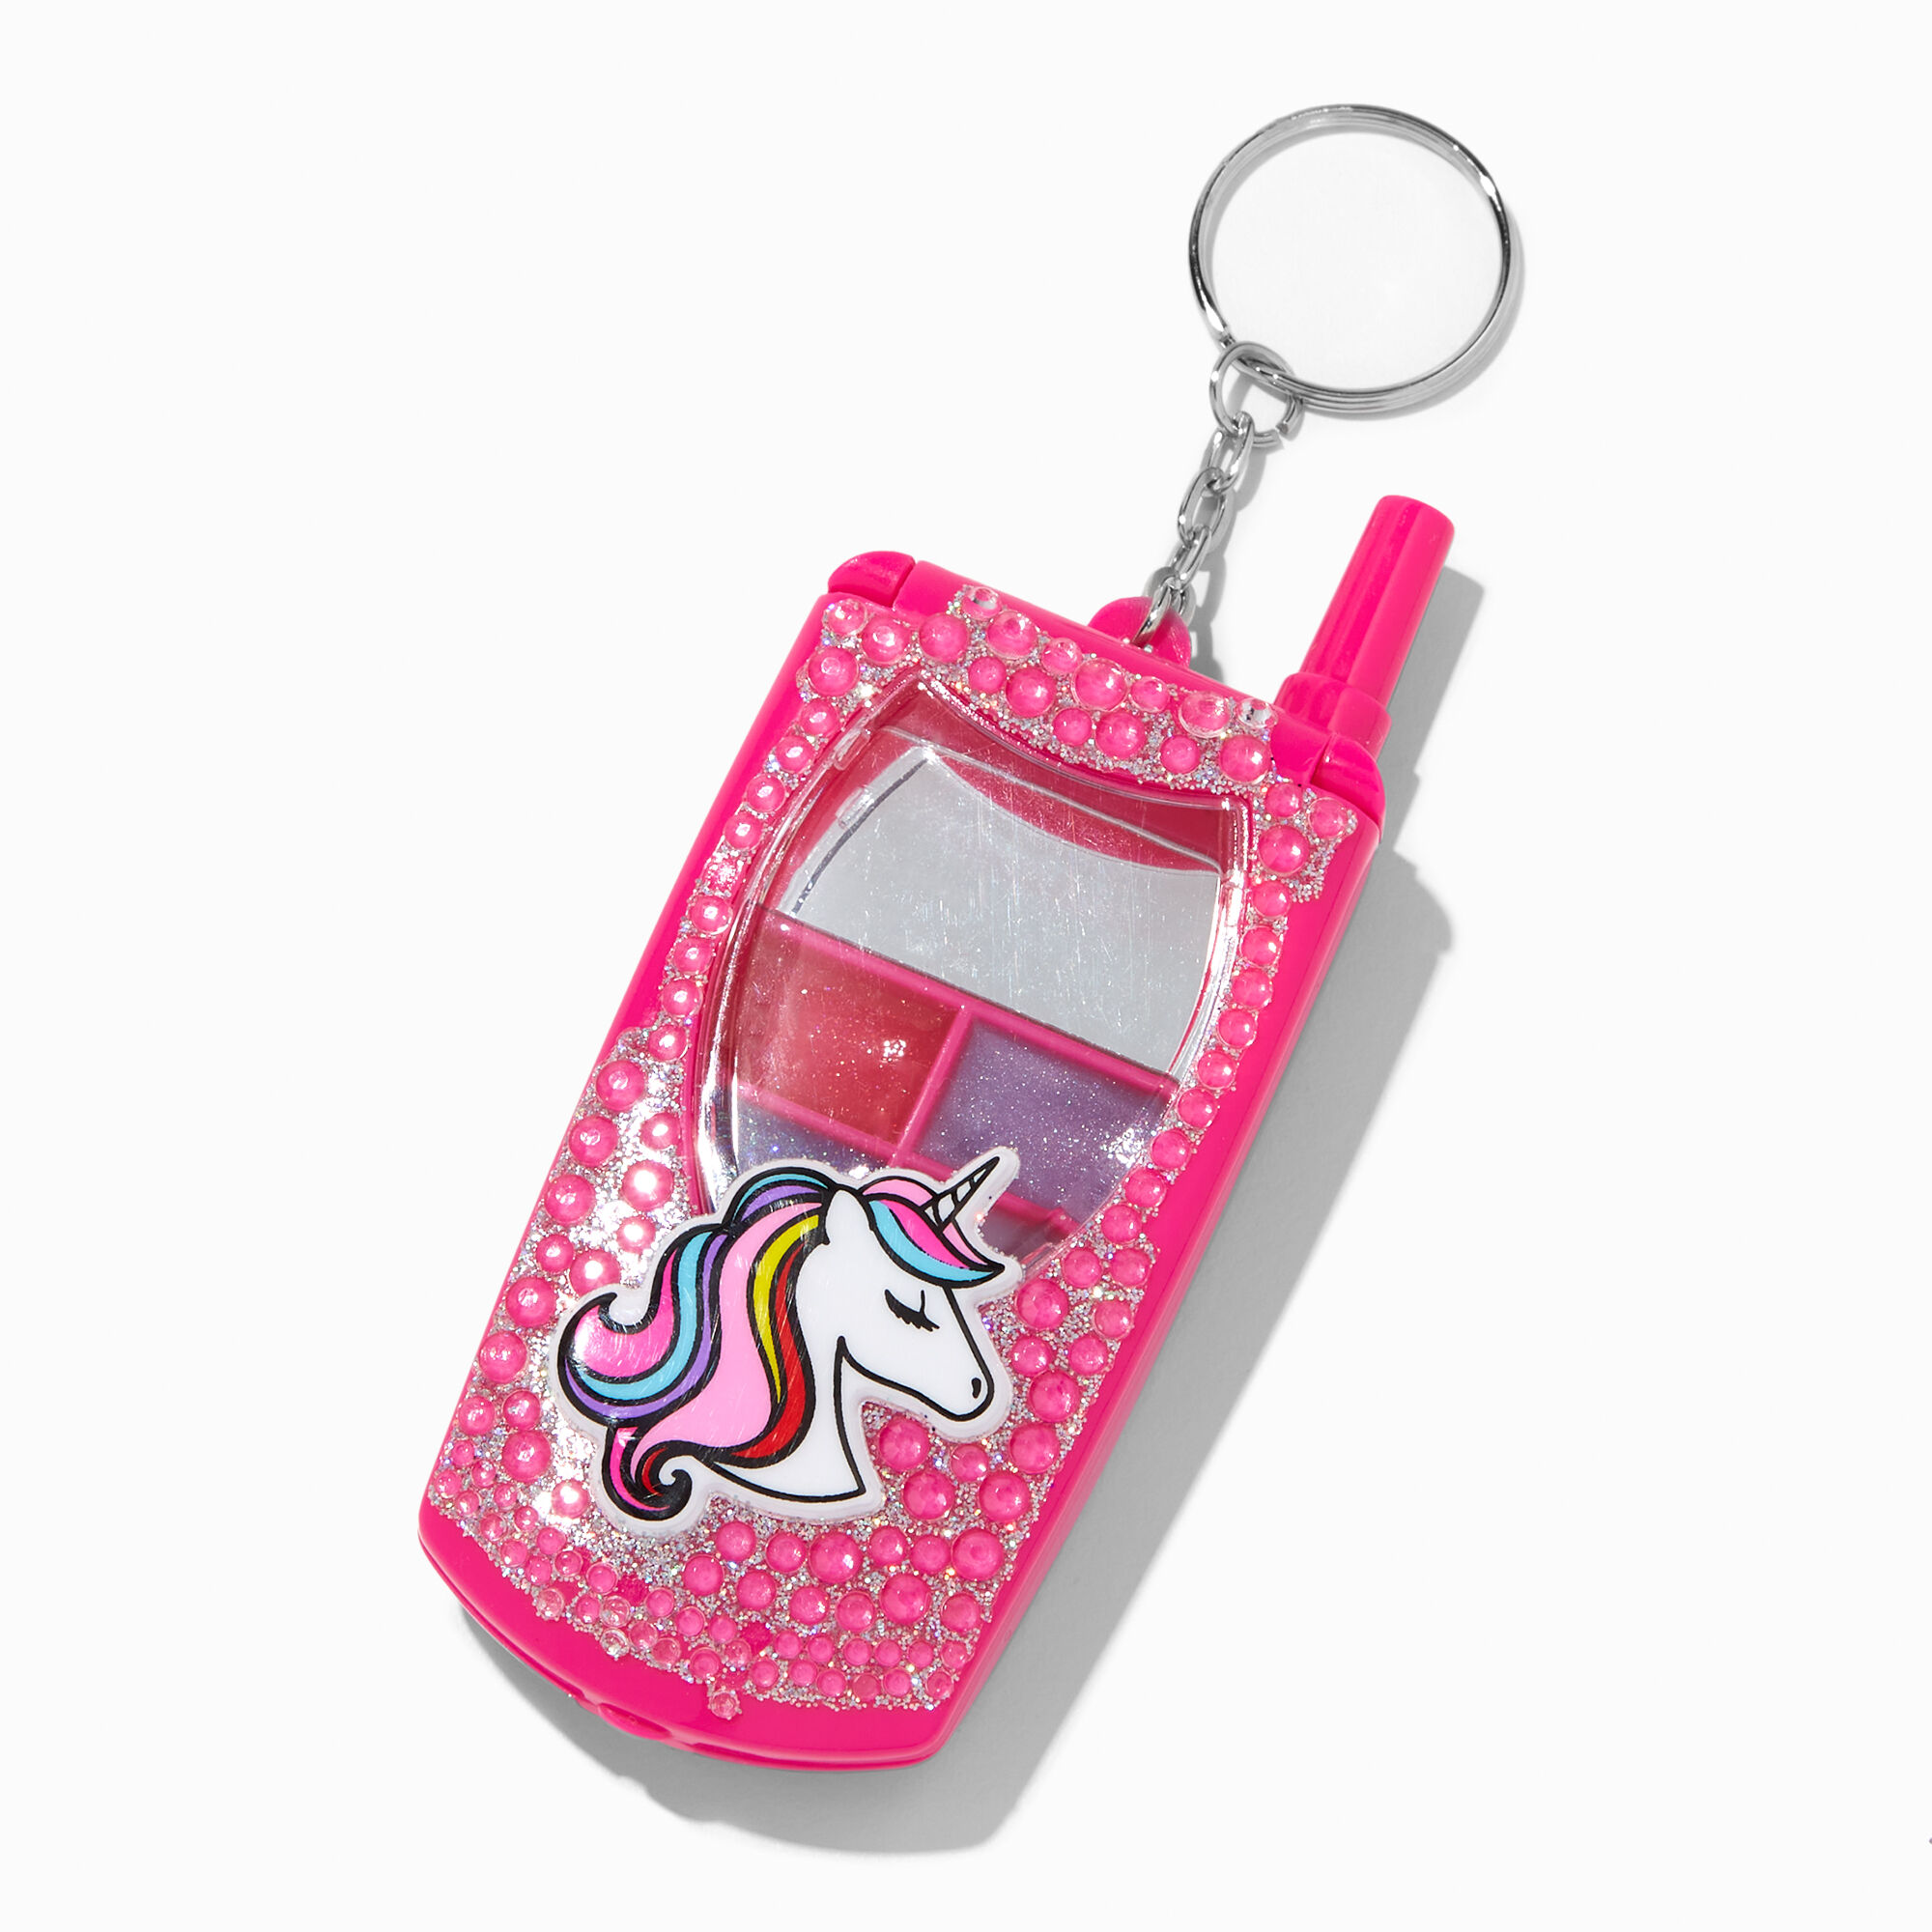 View Claires Y2K Unicorn Bling Flip Phone Lip Gloss Set information